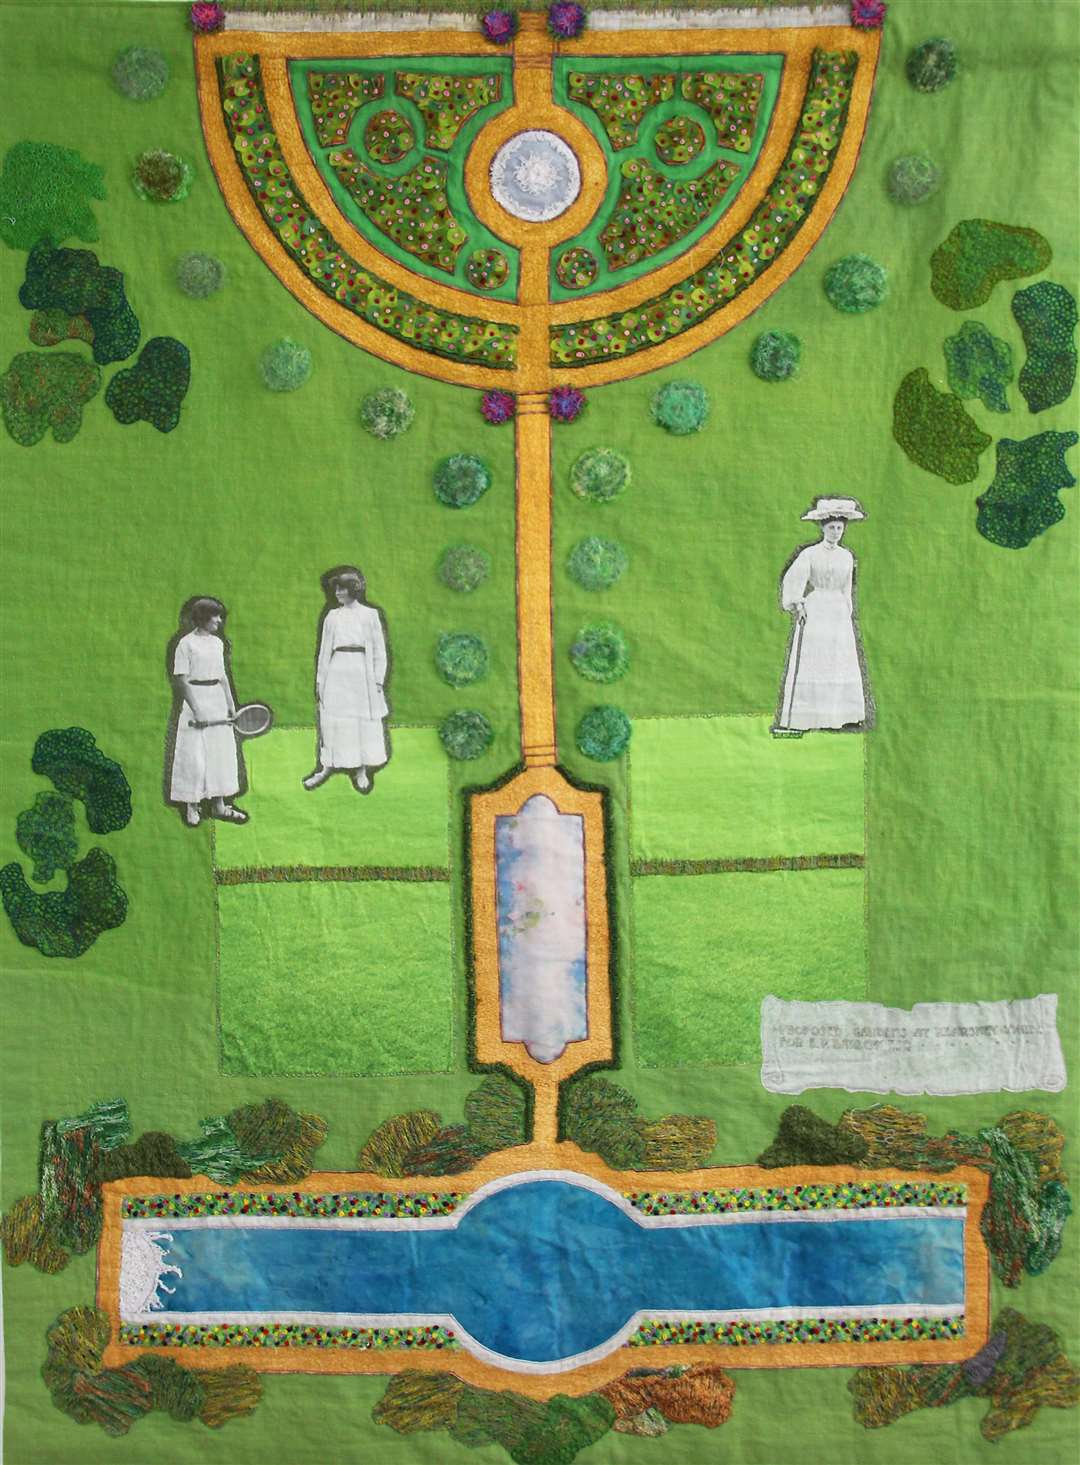 The garden panel by Wendy Ward